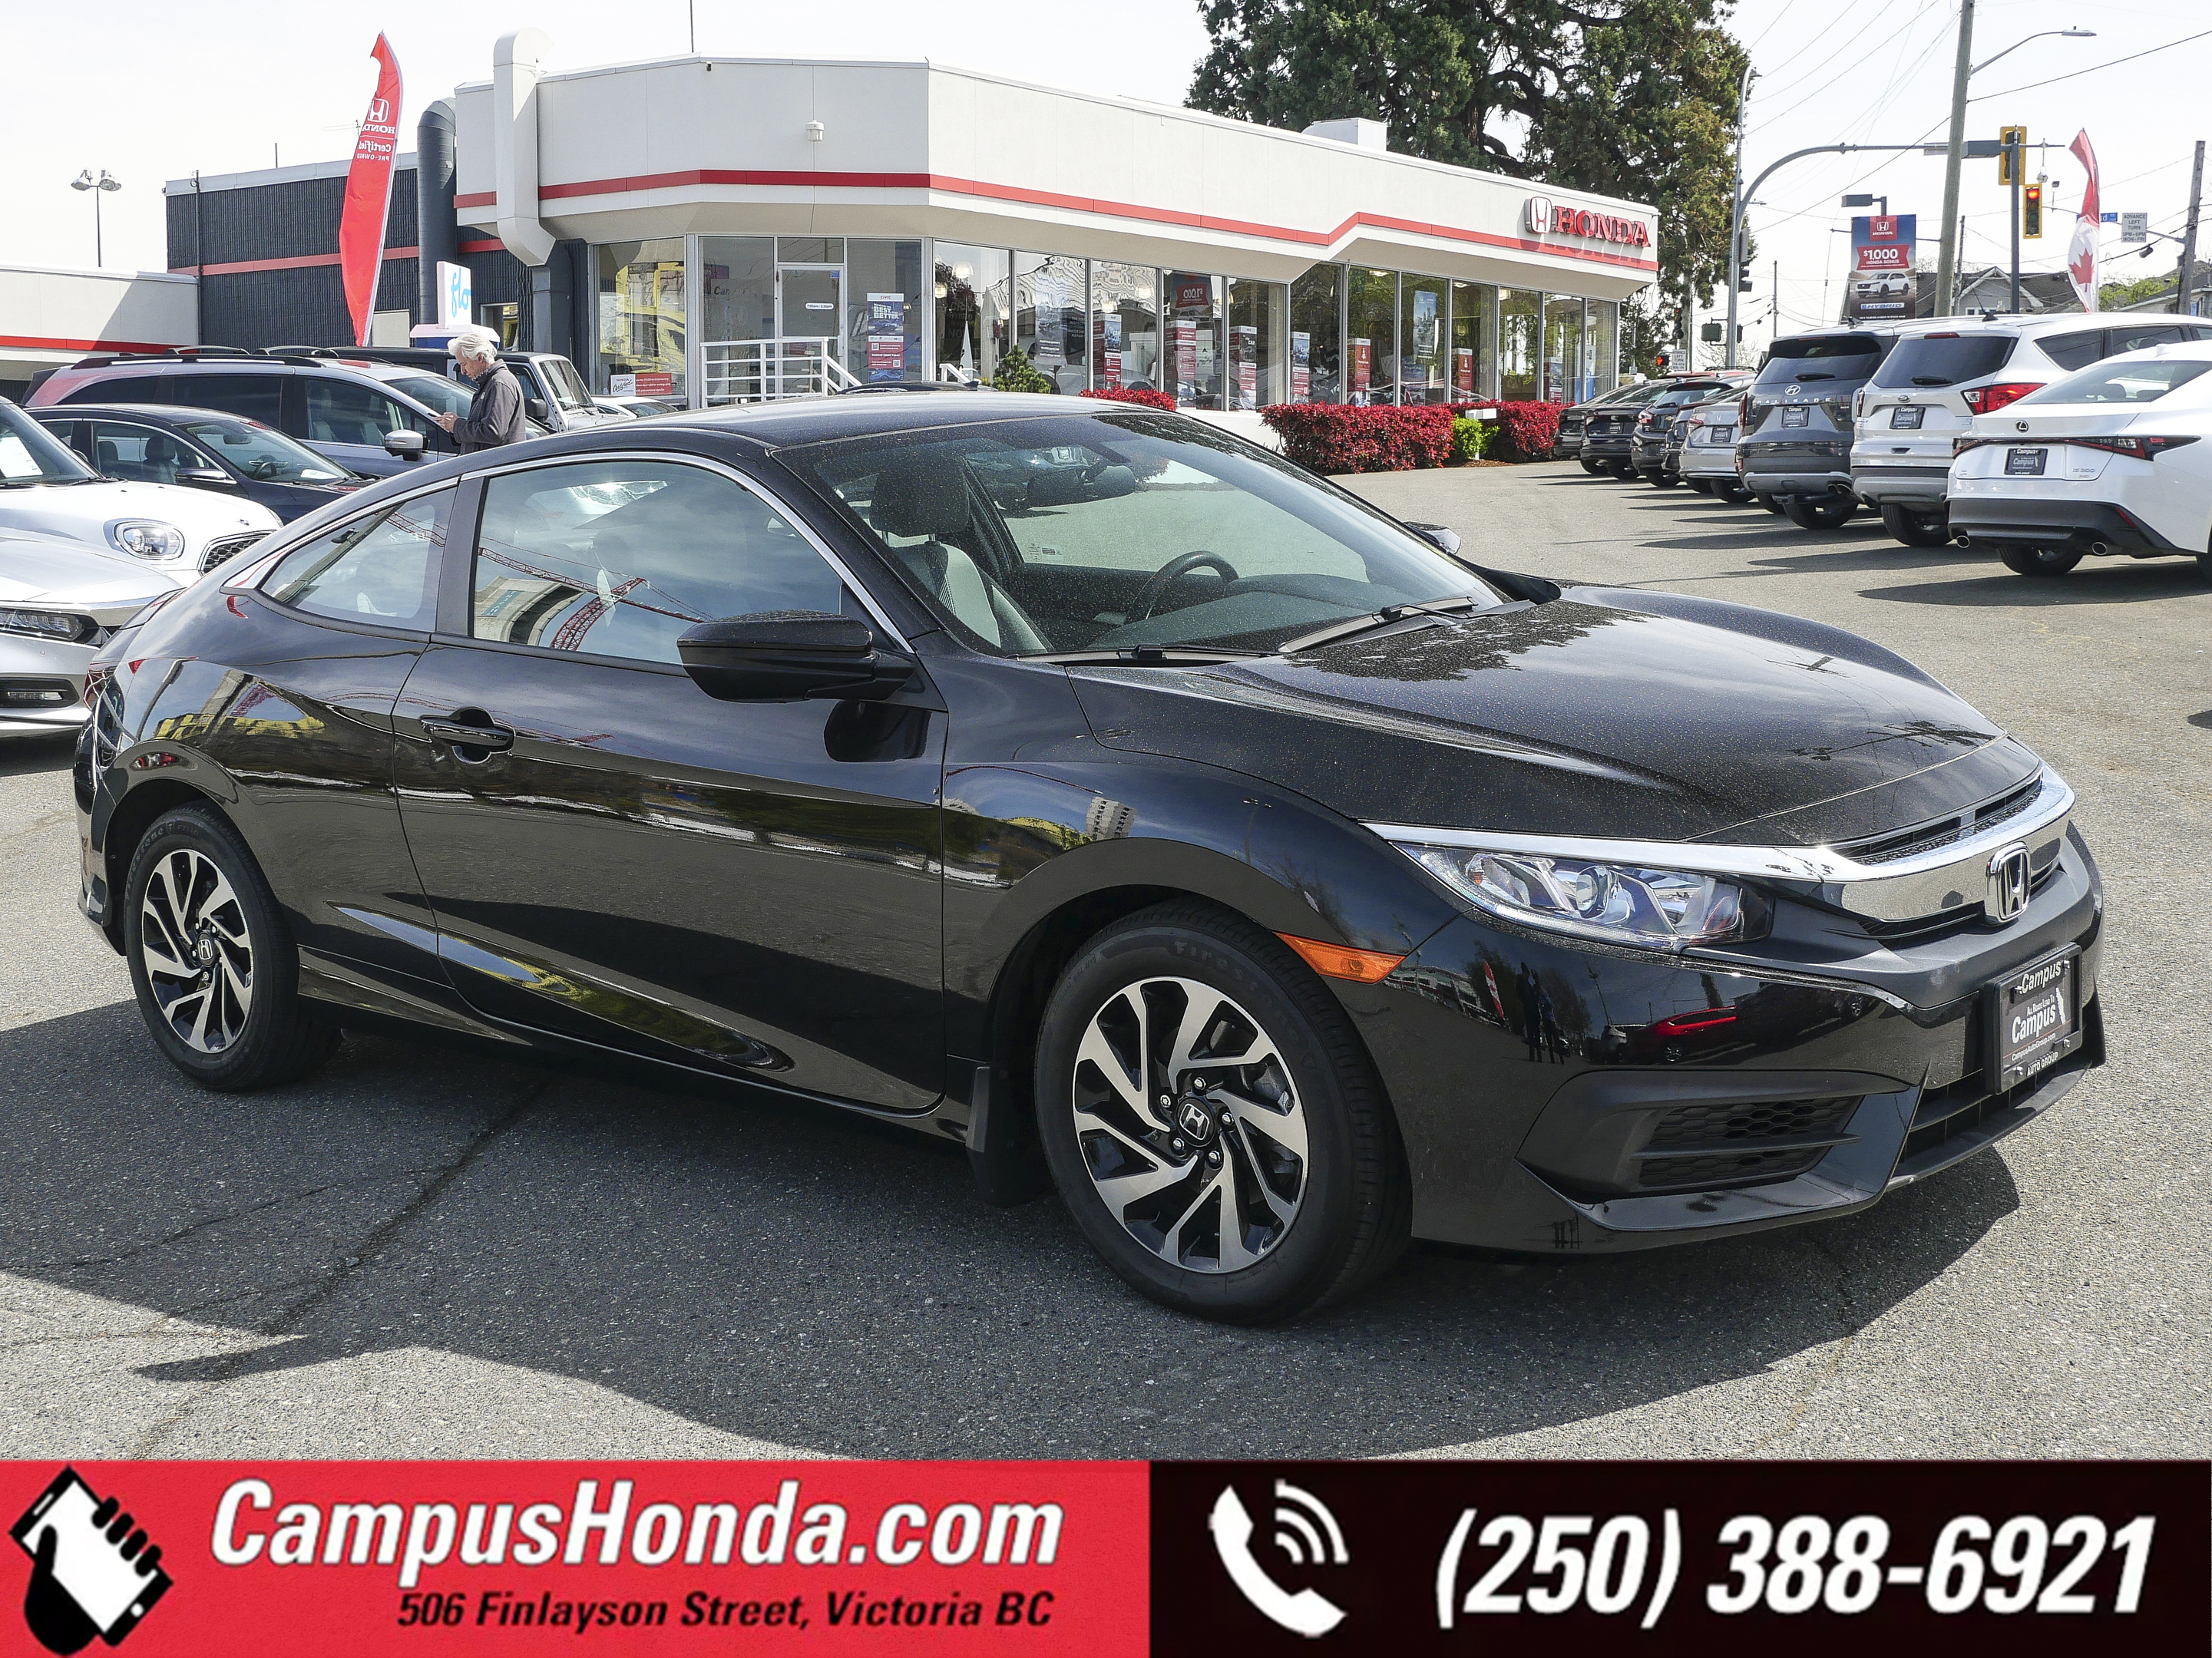 2017 Honda Civic Coupe LX | Manual | One Local Owner | 